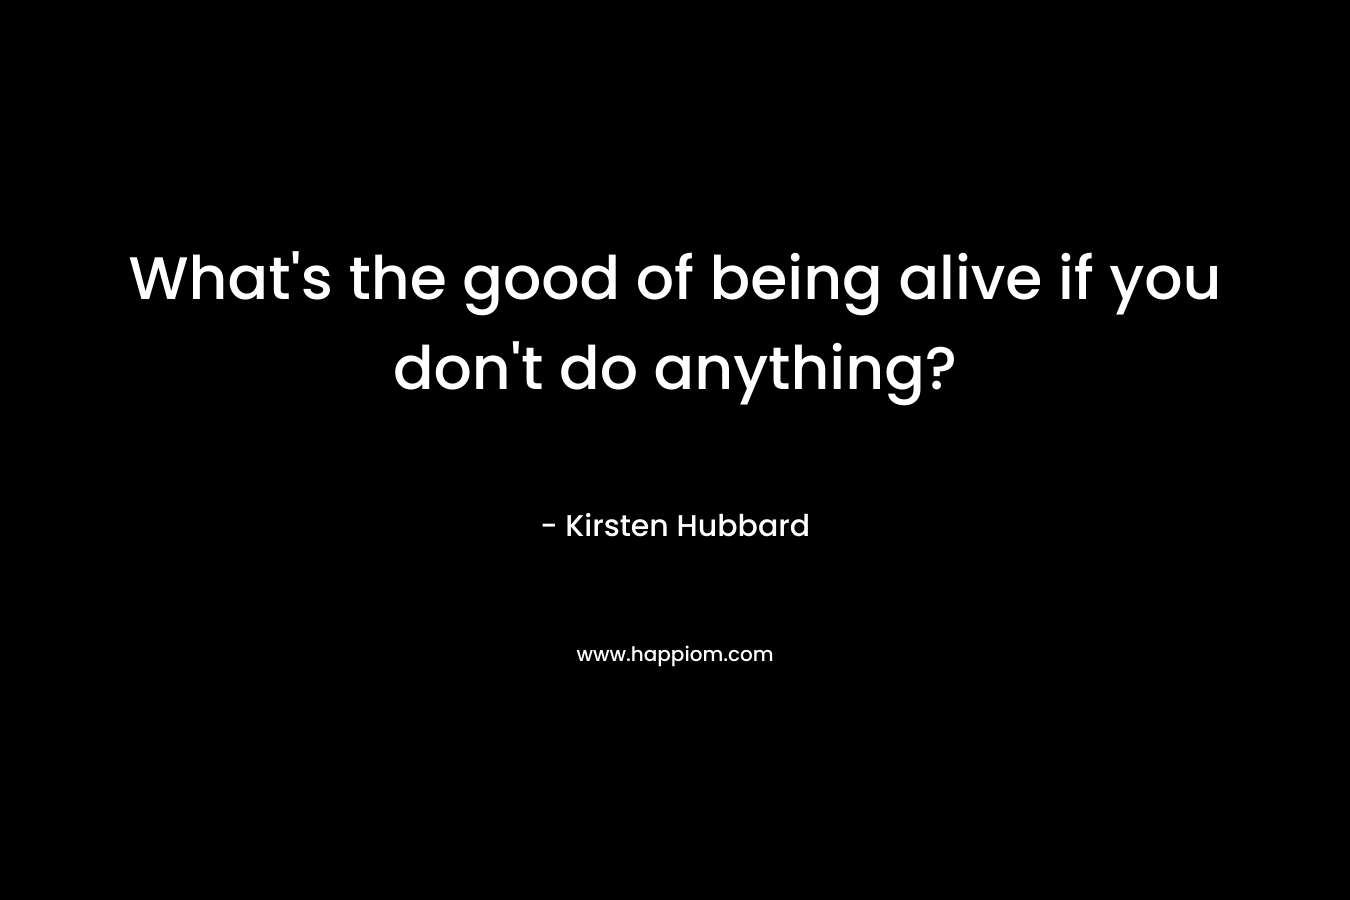 What’s the good of being alive if you don’t do anything? – Kirsten Hubbard